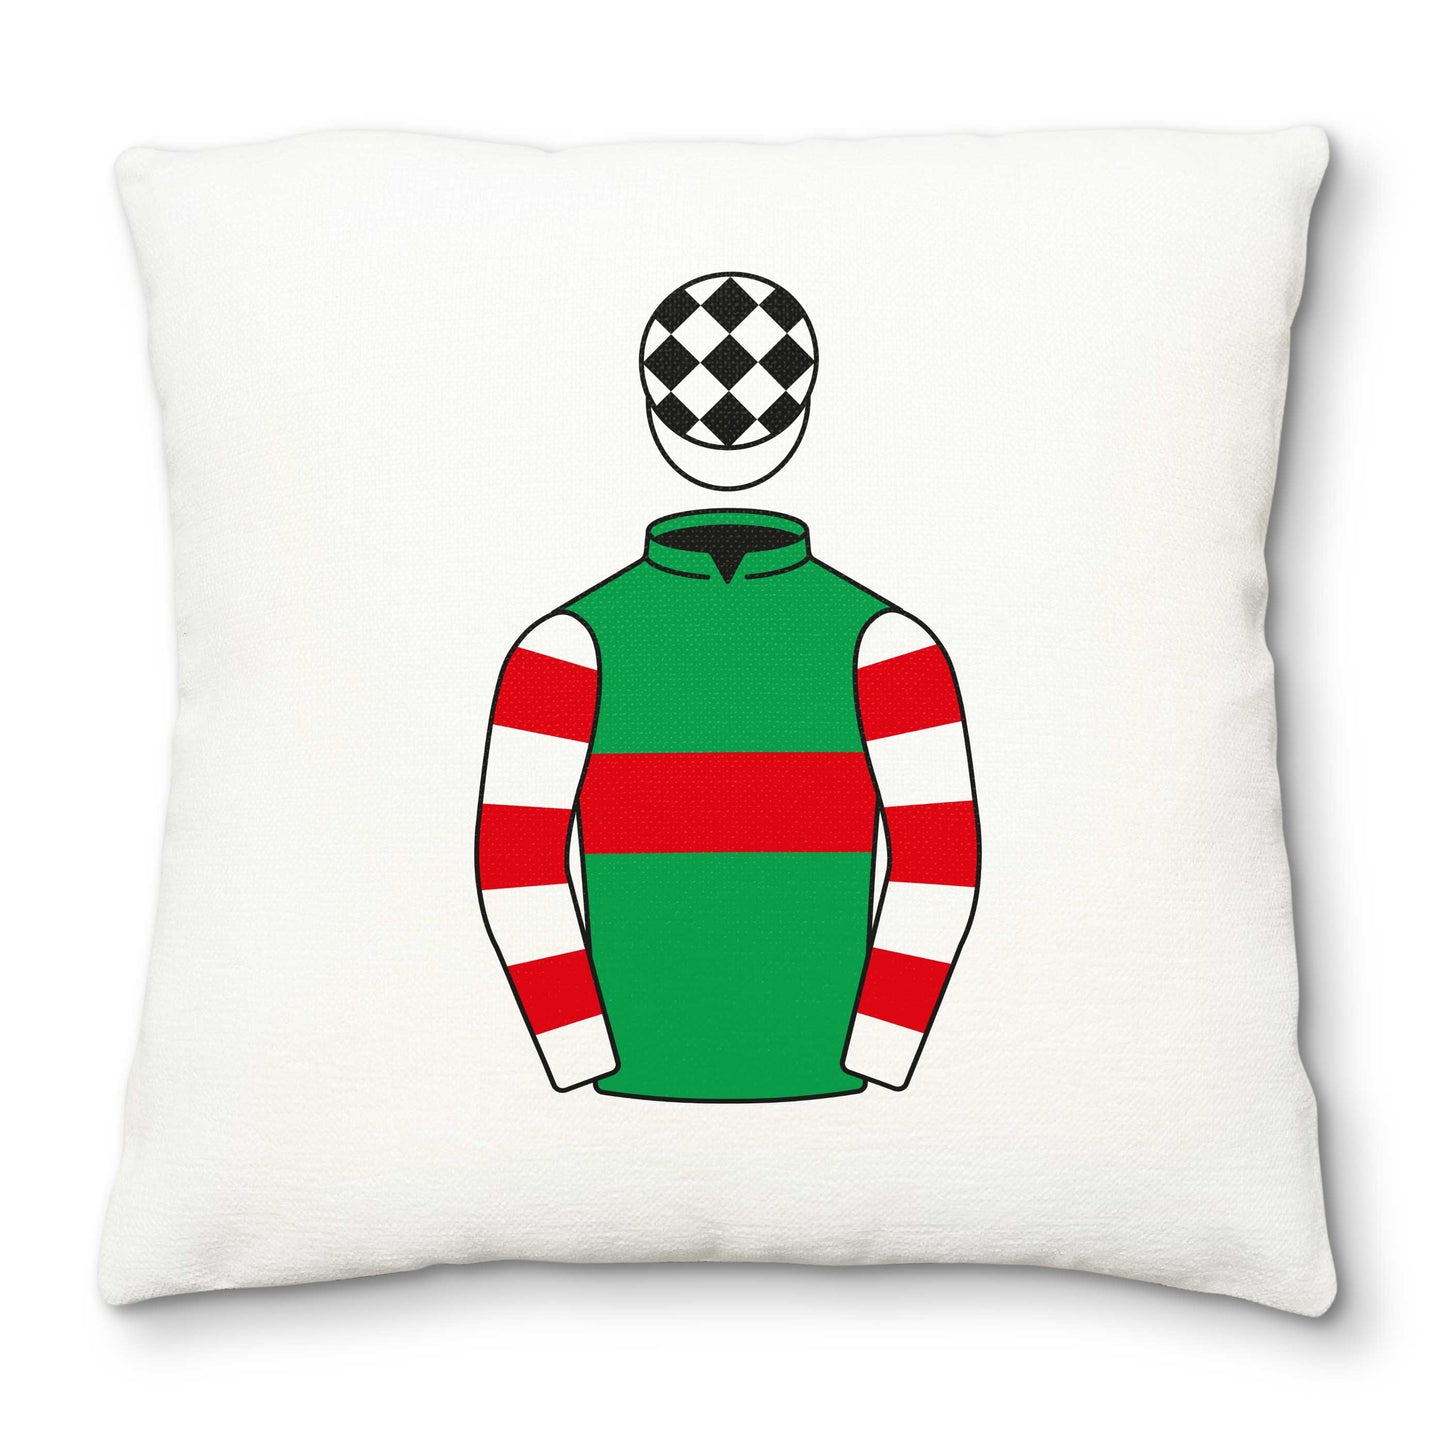 Vivian Healy Deluxe Cushion Cover - Hacked Up